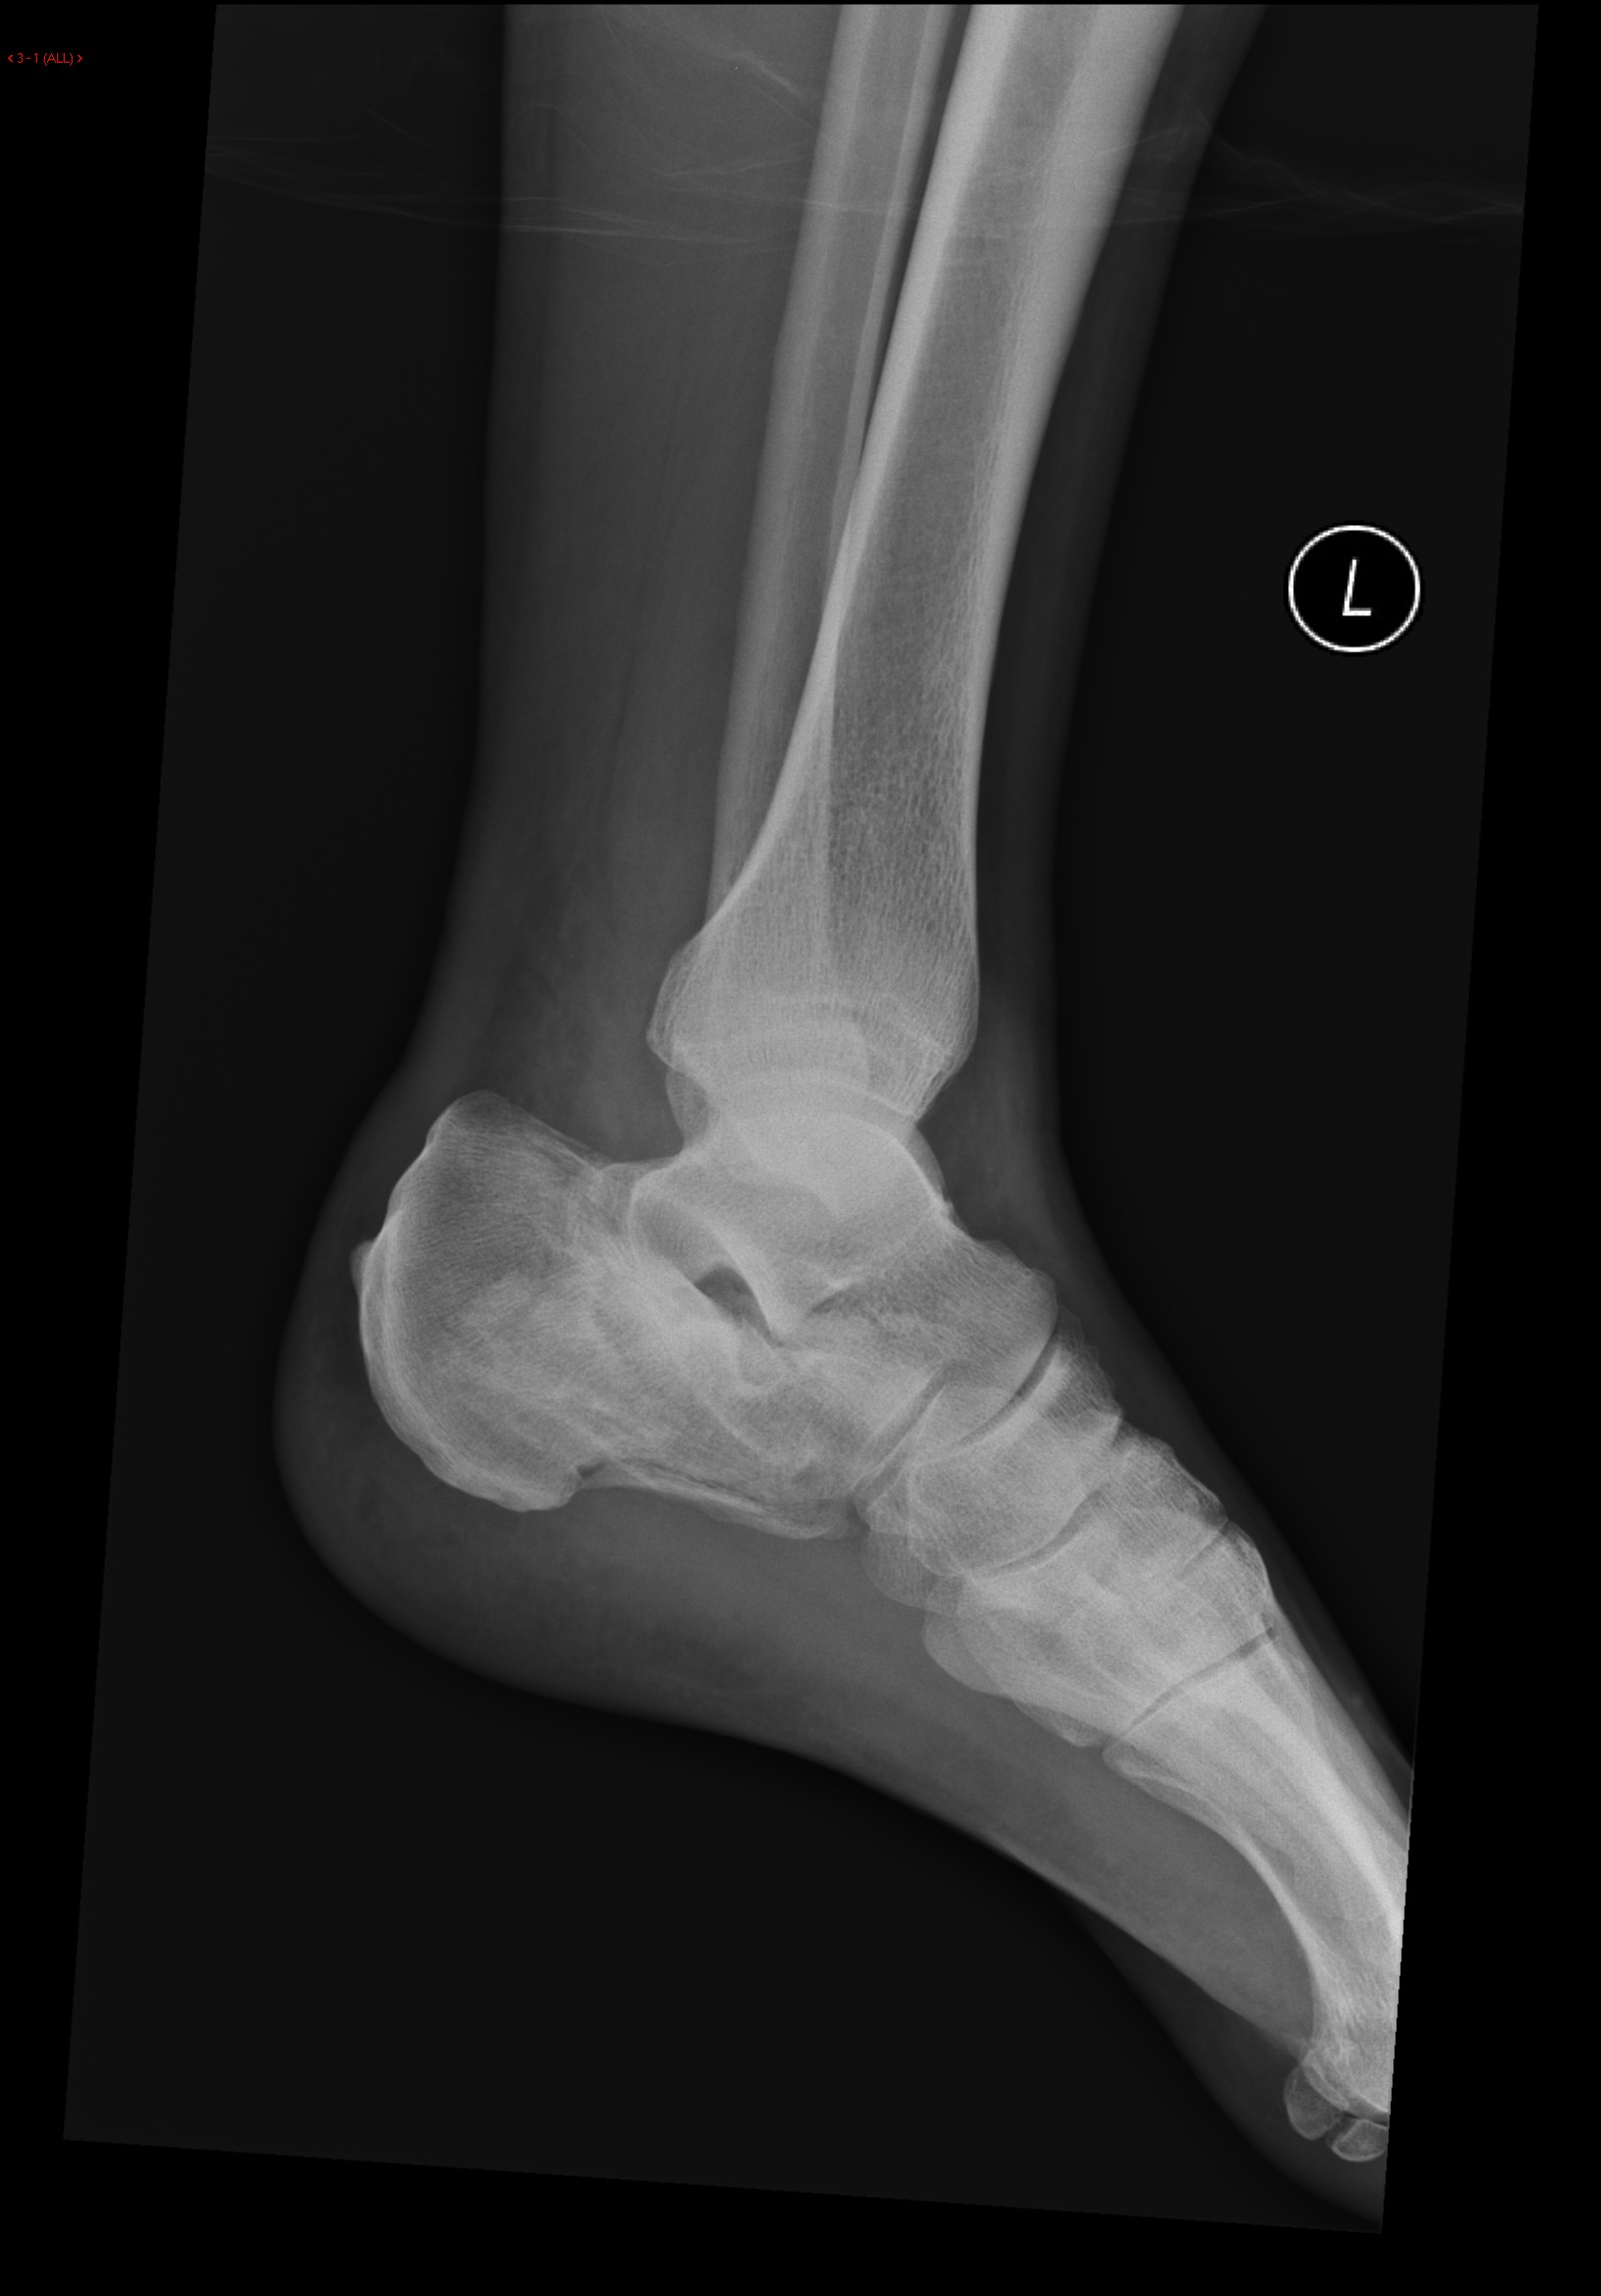 File:Calcaneal-fracture-and-associated-spinal-injury (1).jpg